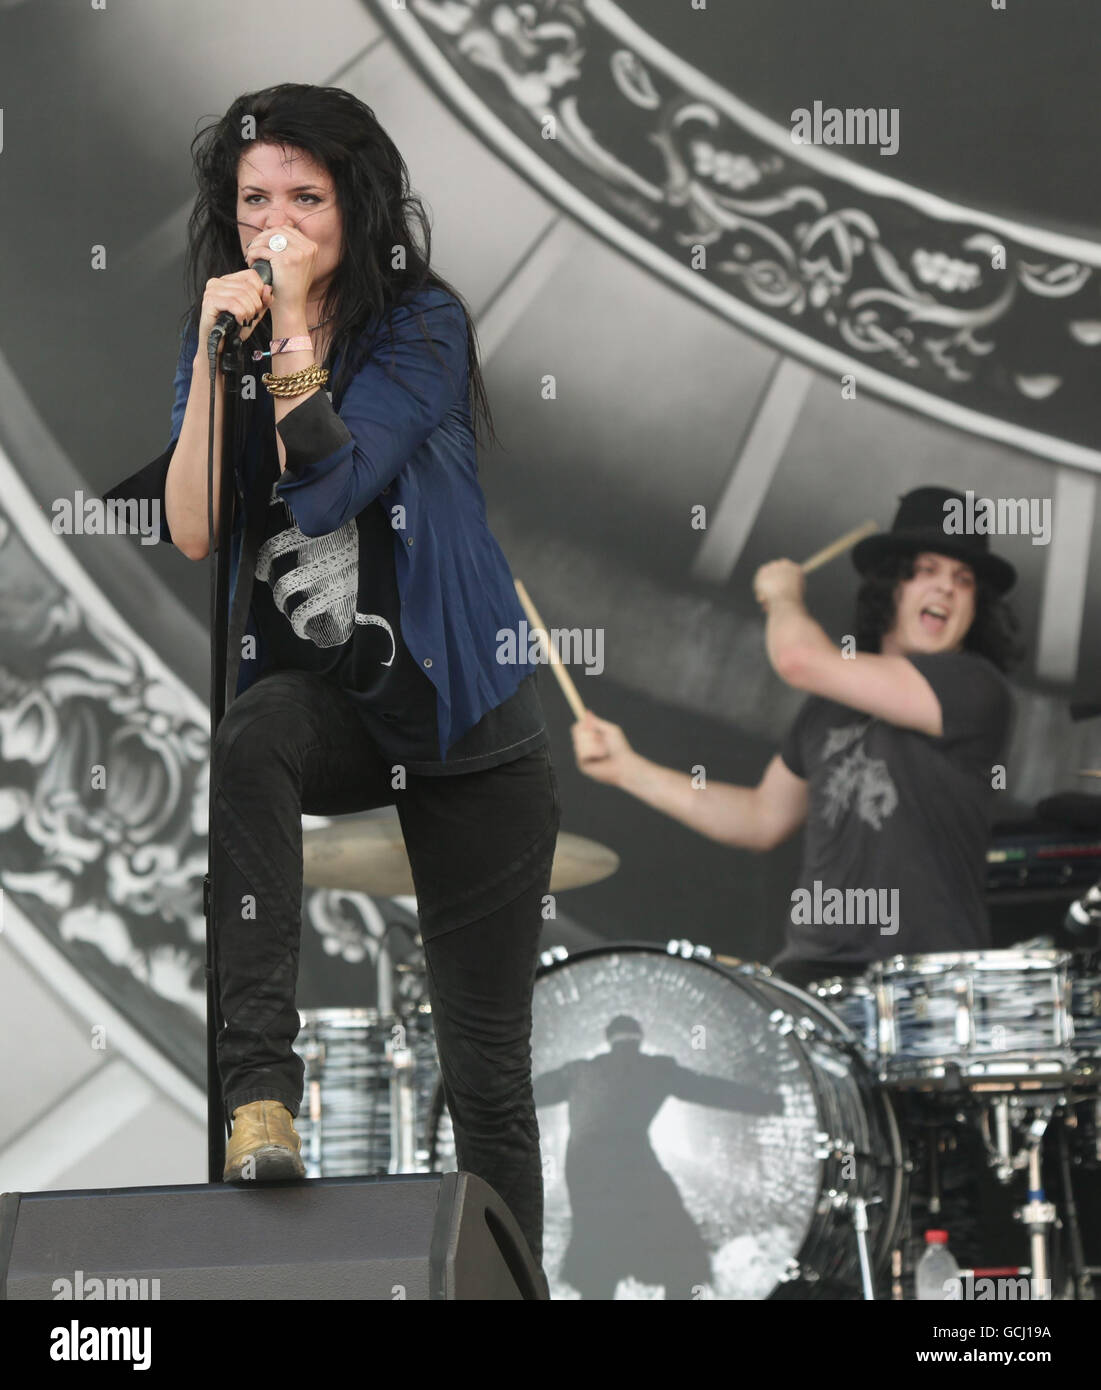 The Dead Weather lead singer Alison Mosshart, with Jack White on drums in the background as their band The Dead Weather perform on the Pyramid stage on the second day of music at Glastonbury Worthy Farm, Somerset. Stock Photo